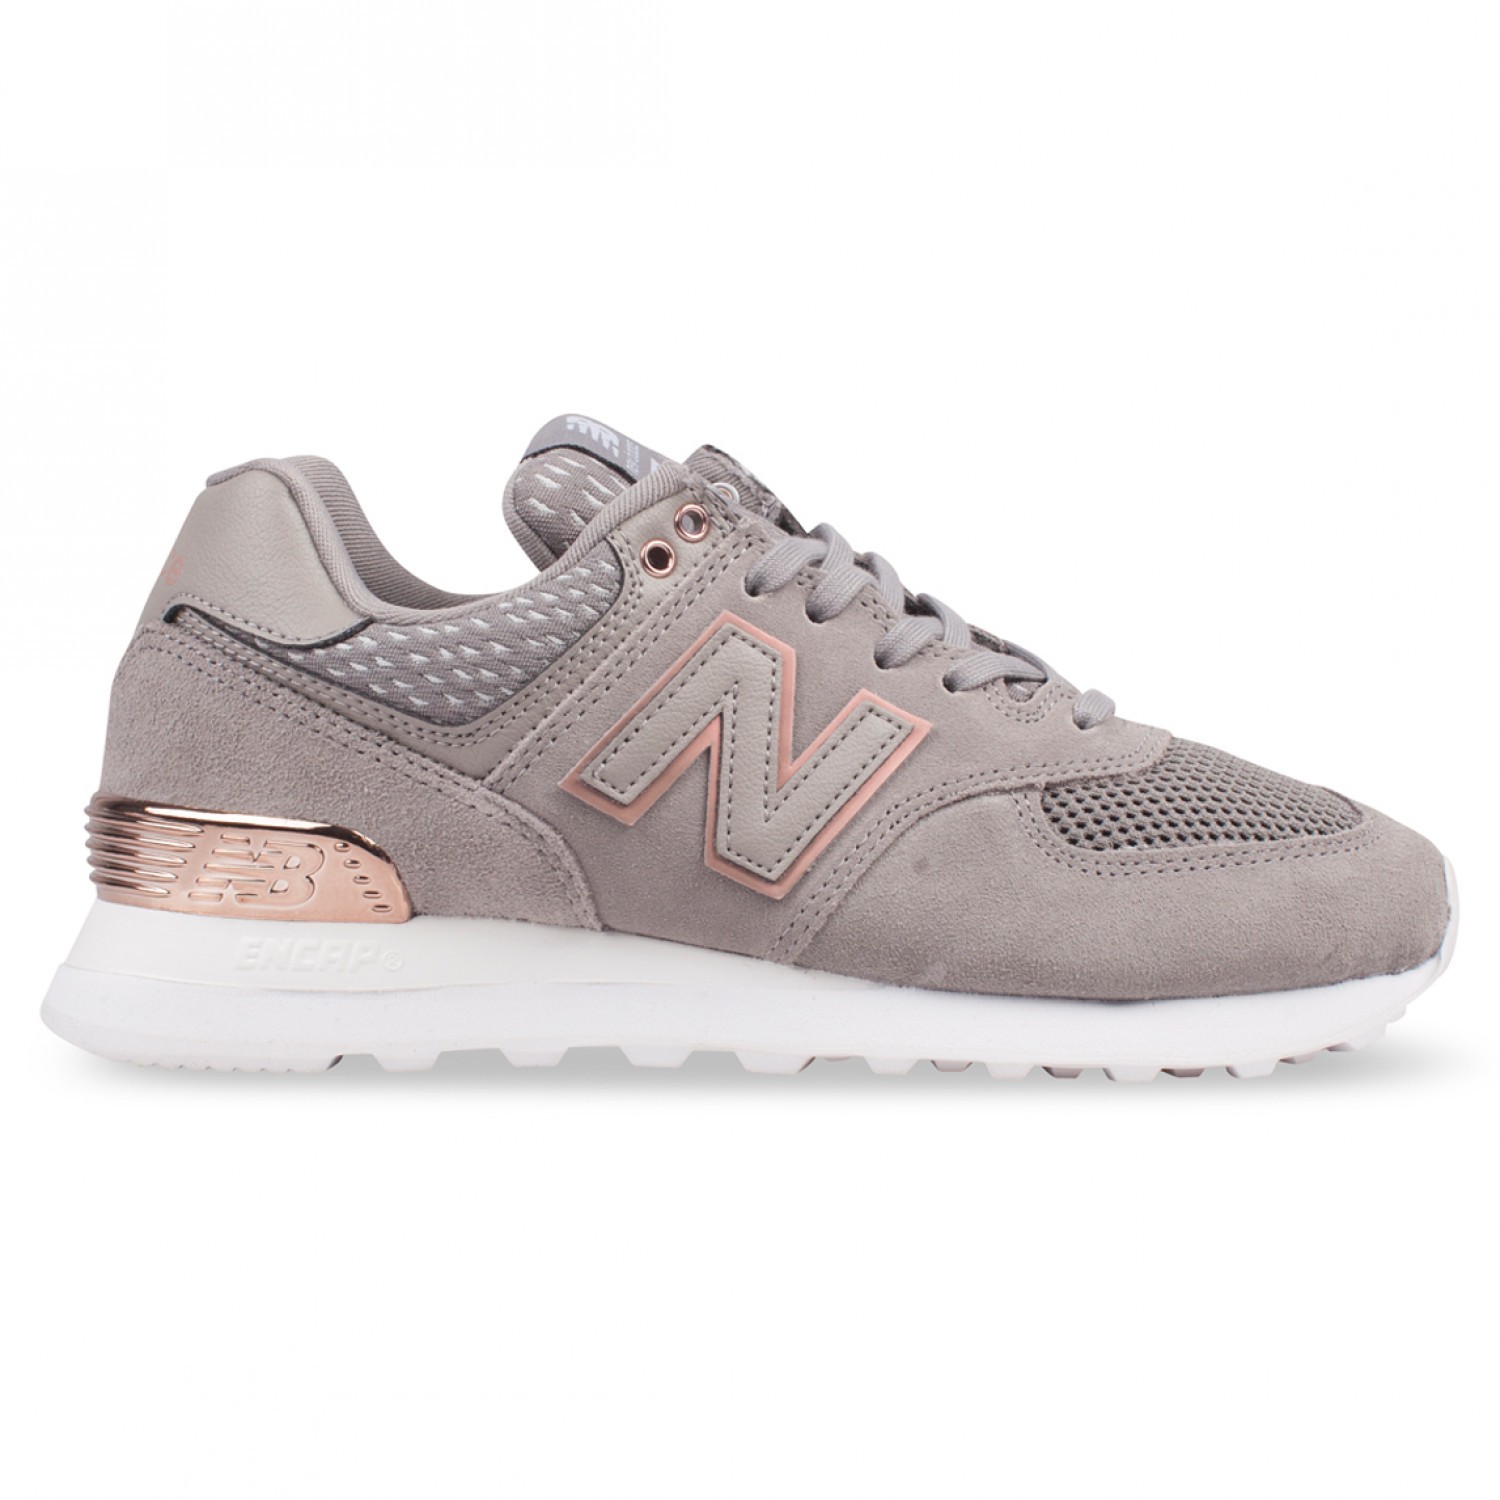 new balance 574 grey and gold